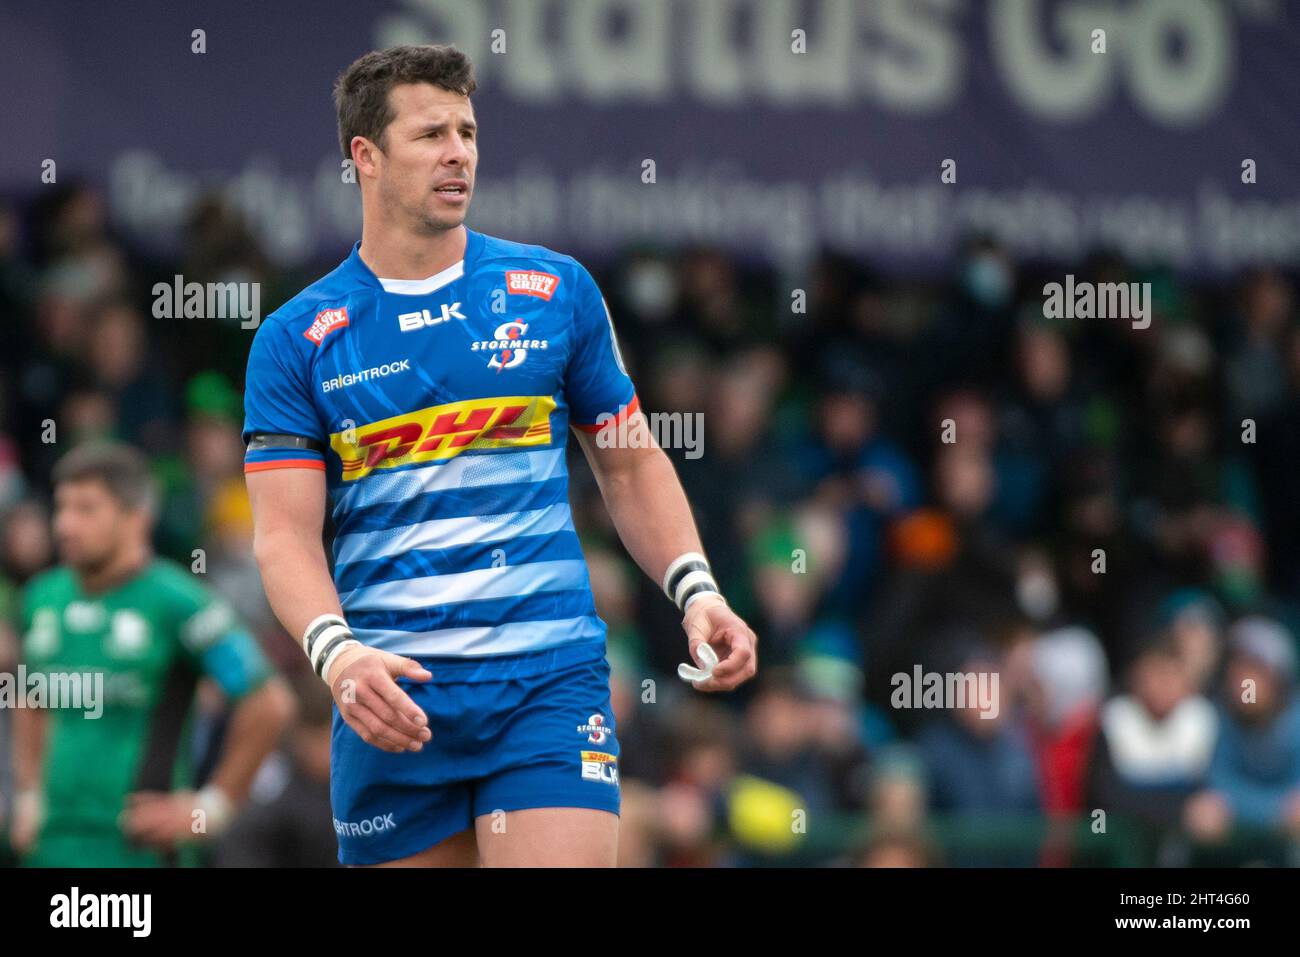 Ruhan Nel of Stormers looks on during the United Rugby Championship Round 10 match between Connacht Rugby and DHL Stormers at the Sportsground in Galway, Ireland on February 26, 2022 (Photo by